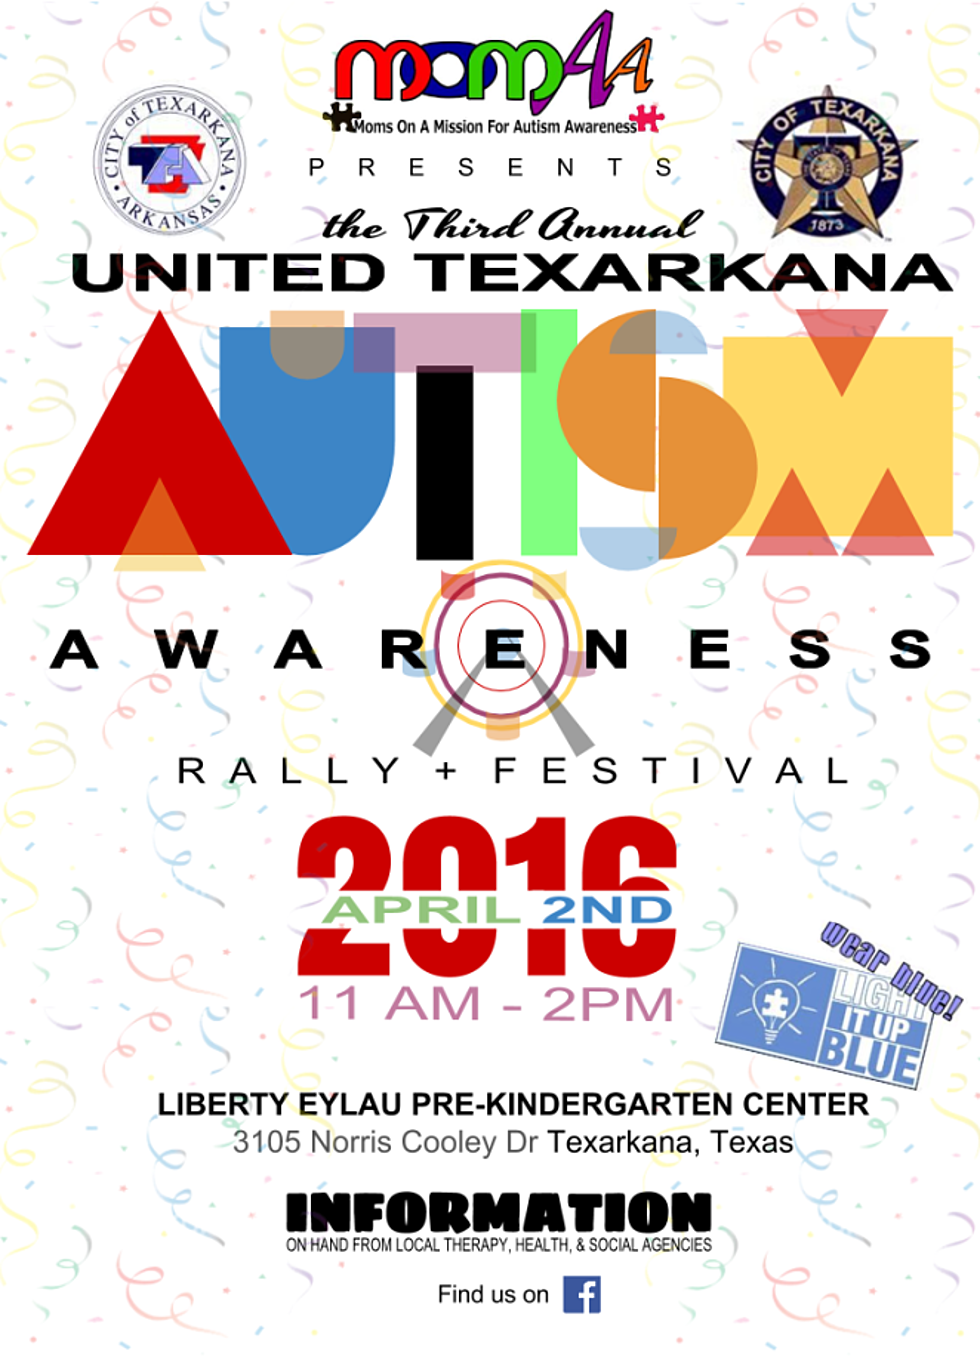 3rd Annual United Texarkana Autism Awareness Rally and Festival